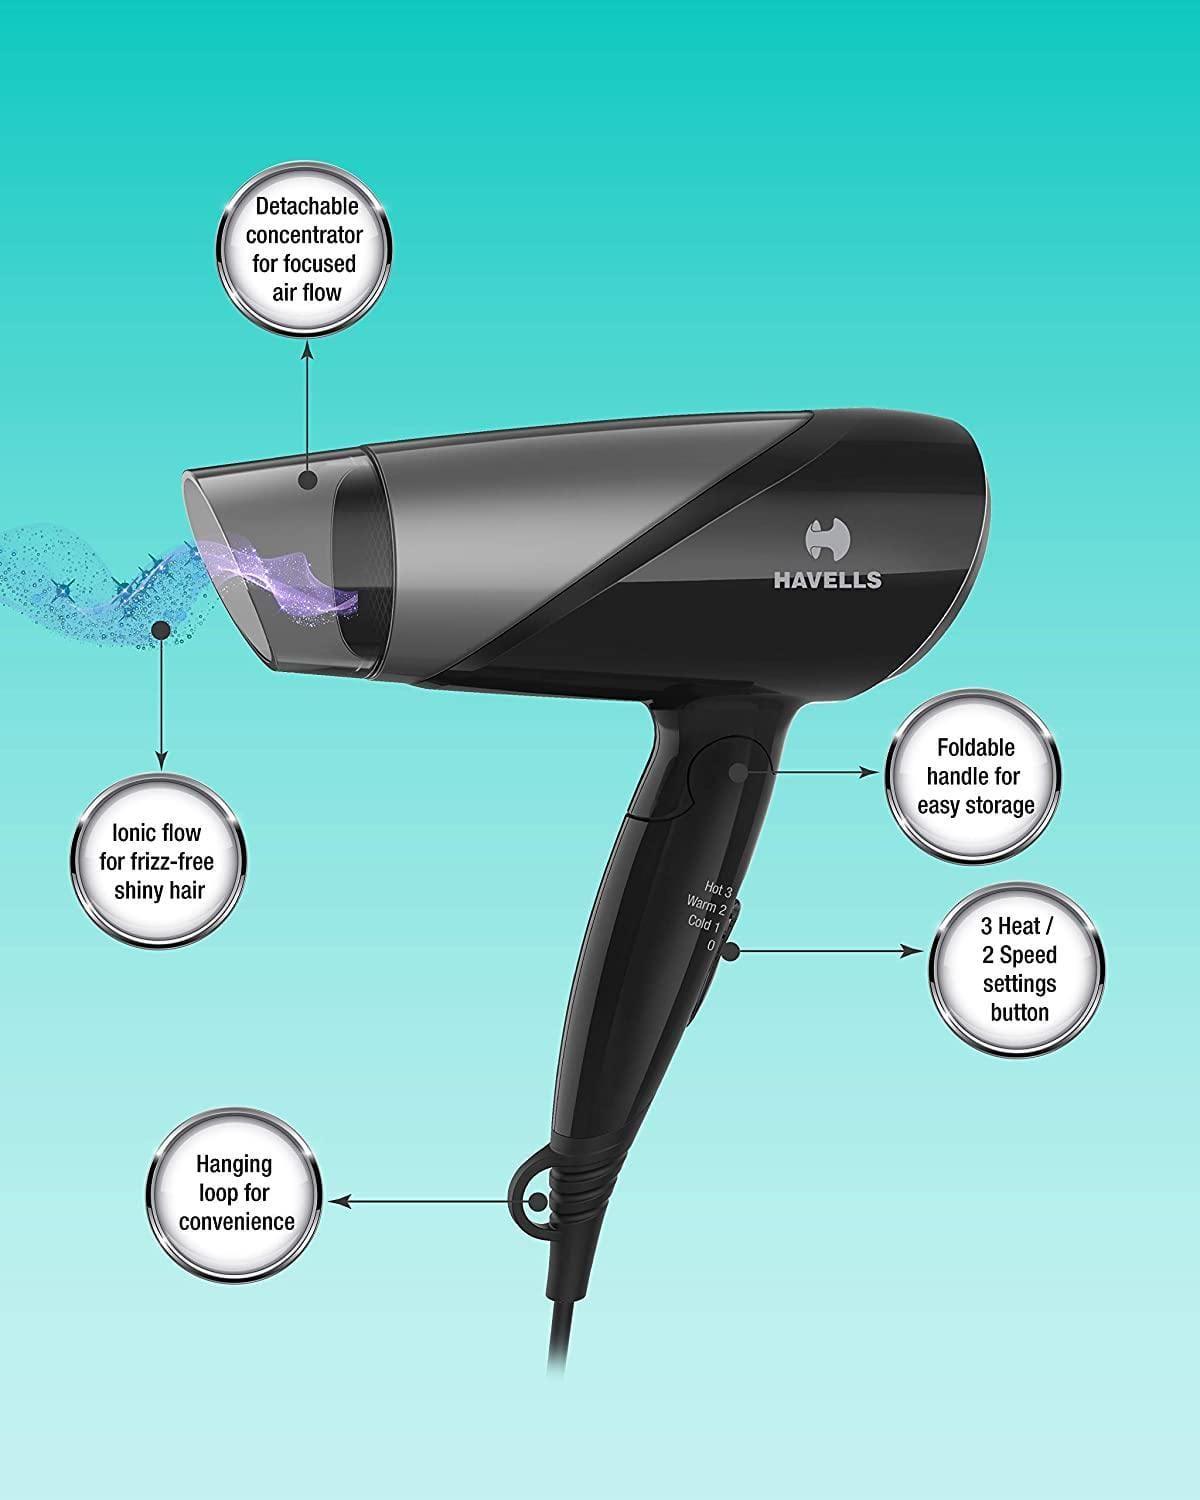 Havells HD3251 1600 W Ionic Cool SHOT & Foldable Hair Dryer (Black)-Home & Kitchen Accessories-dealsplant